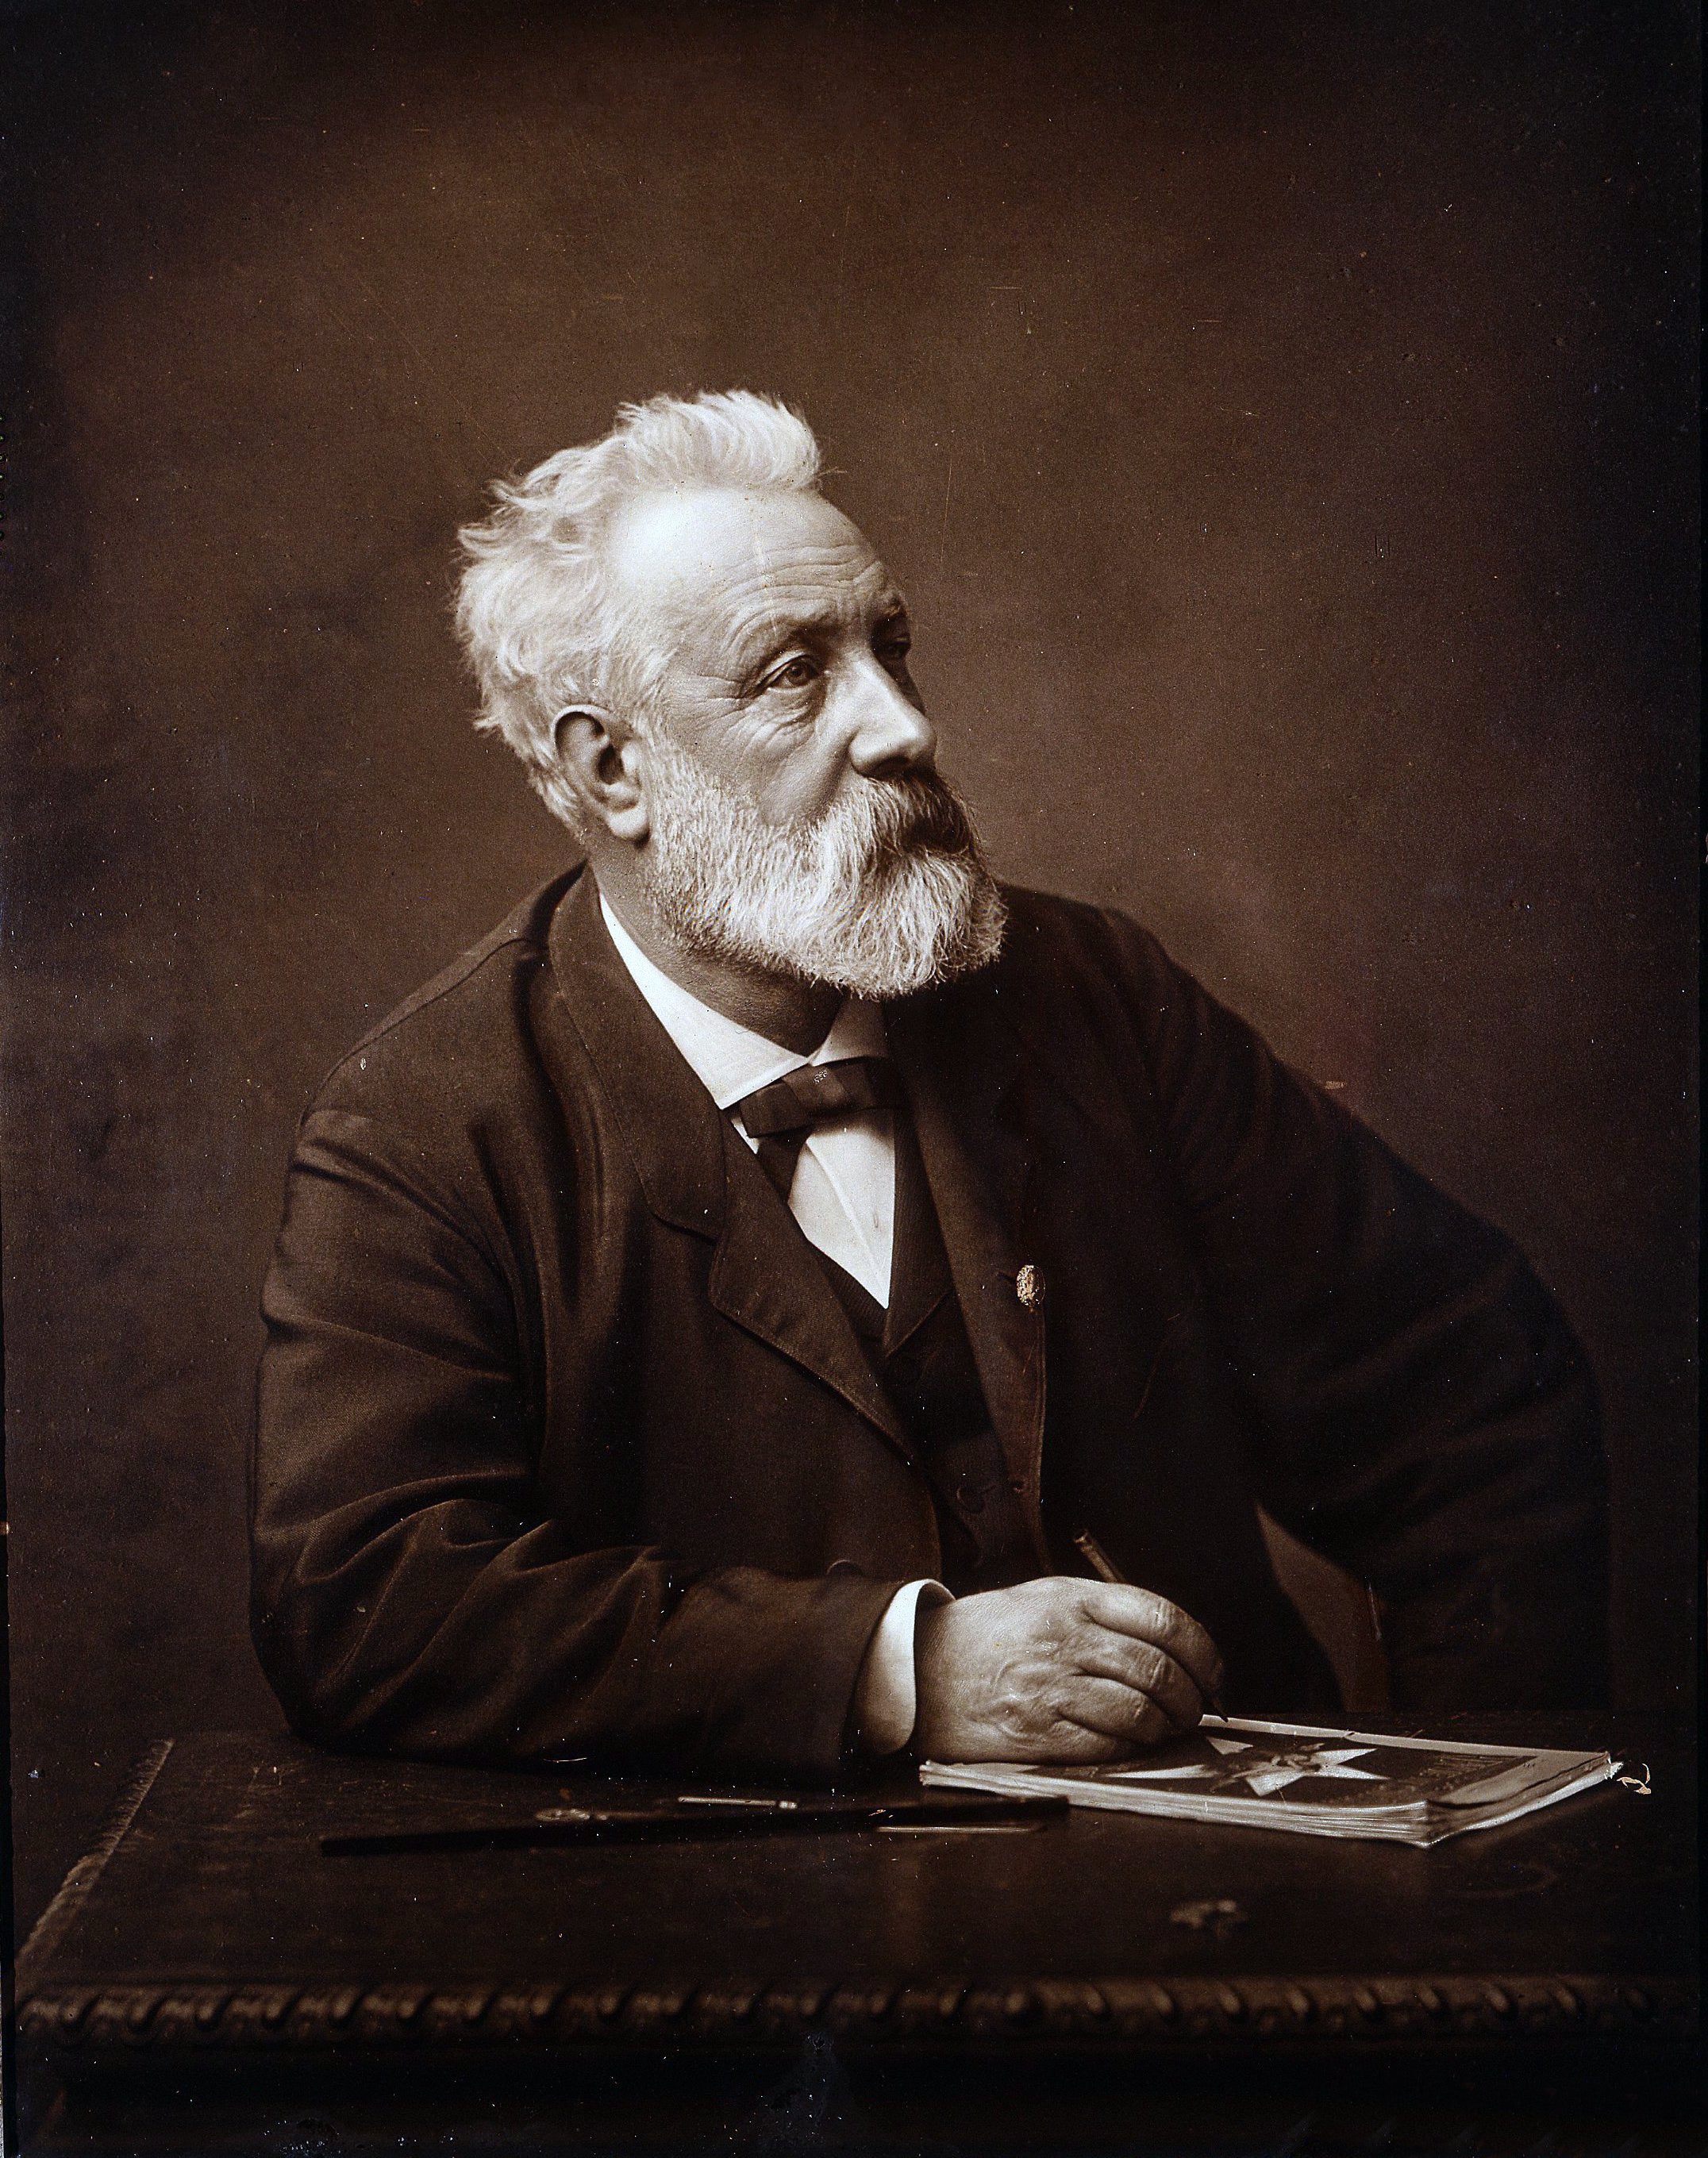 Photo of Jules Verne